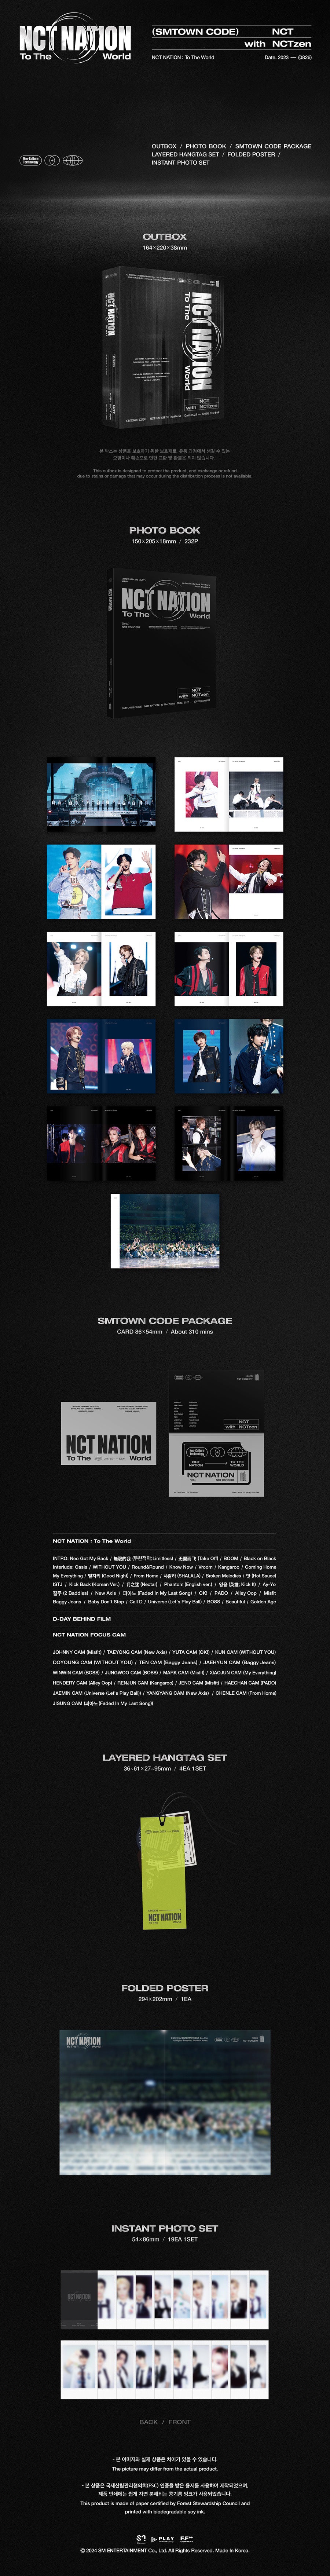 NCT - 2023 NCT CONCERT (NCT NATION : TO THE WORLD IN INCHEON SMTOWN CODE)